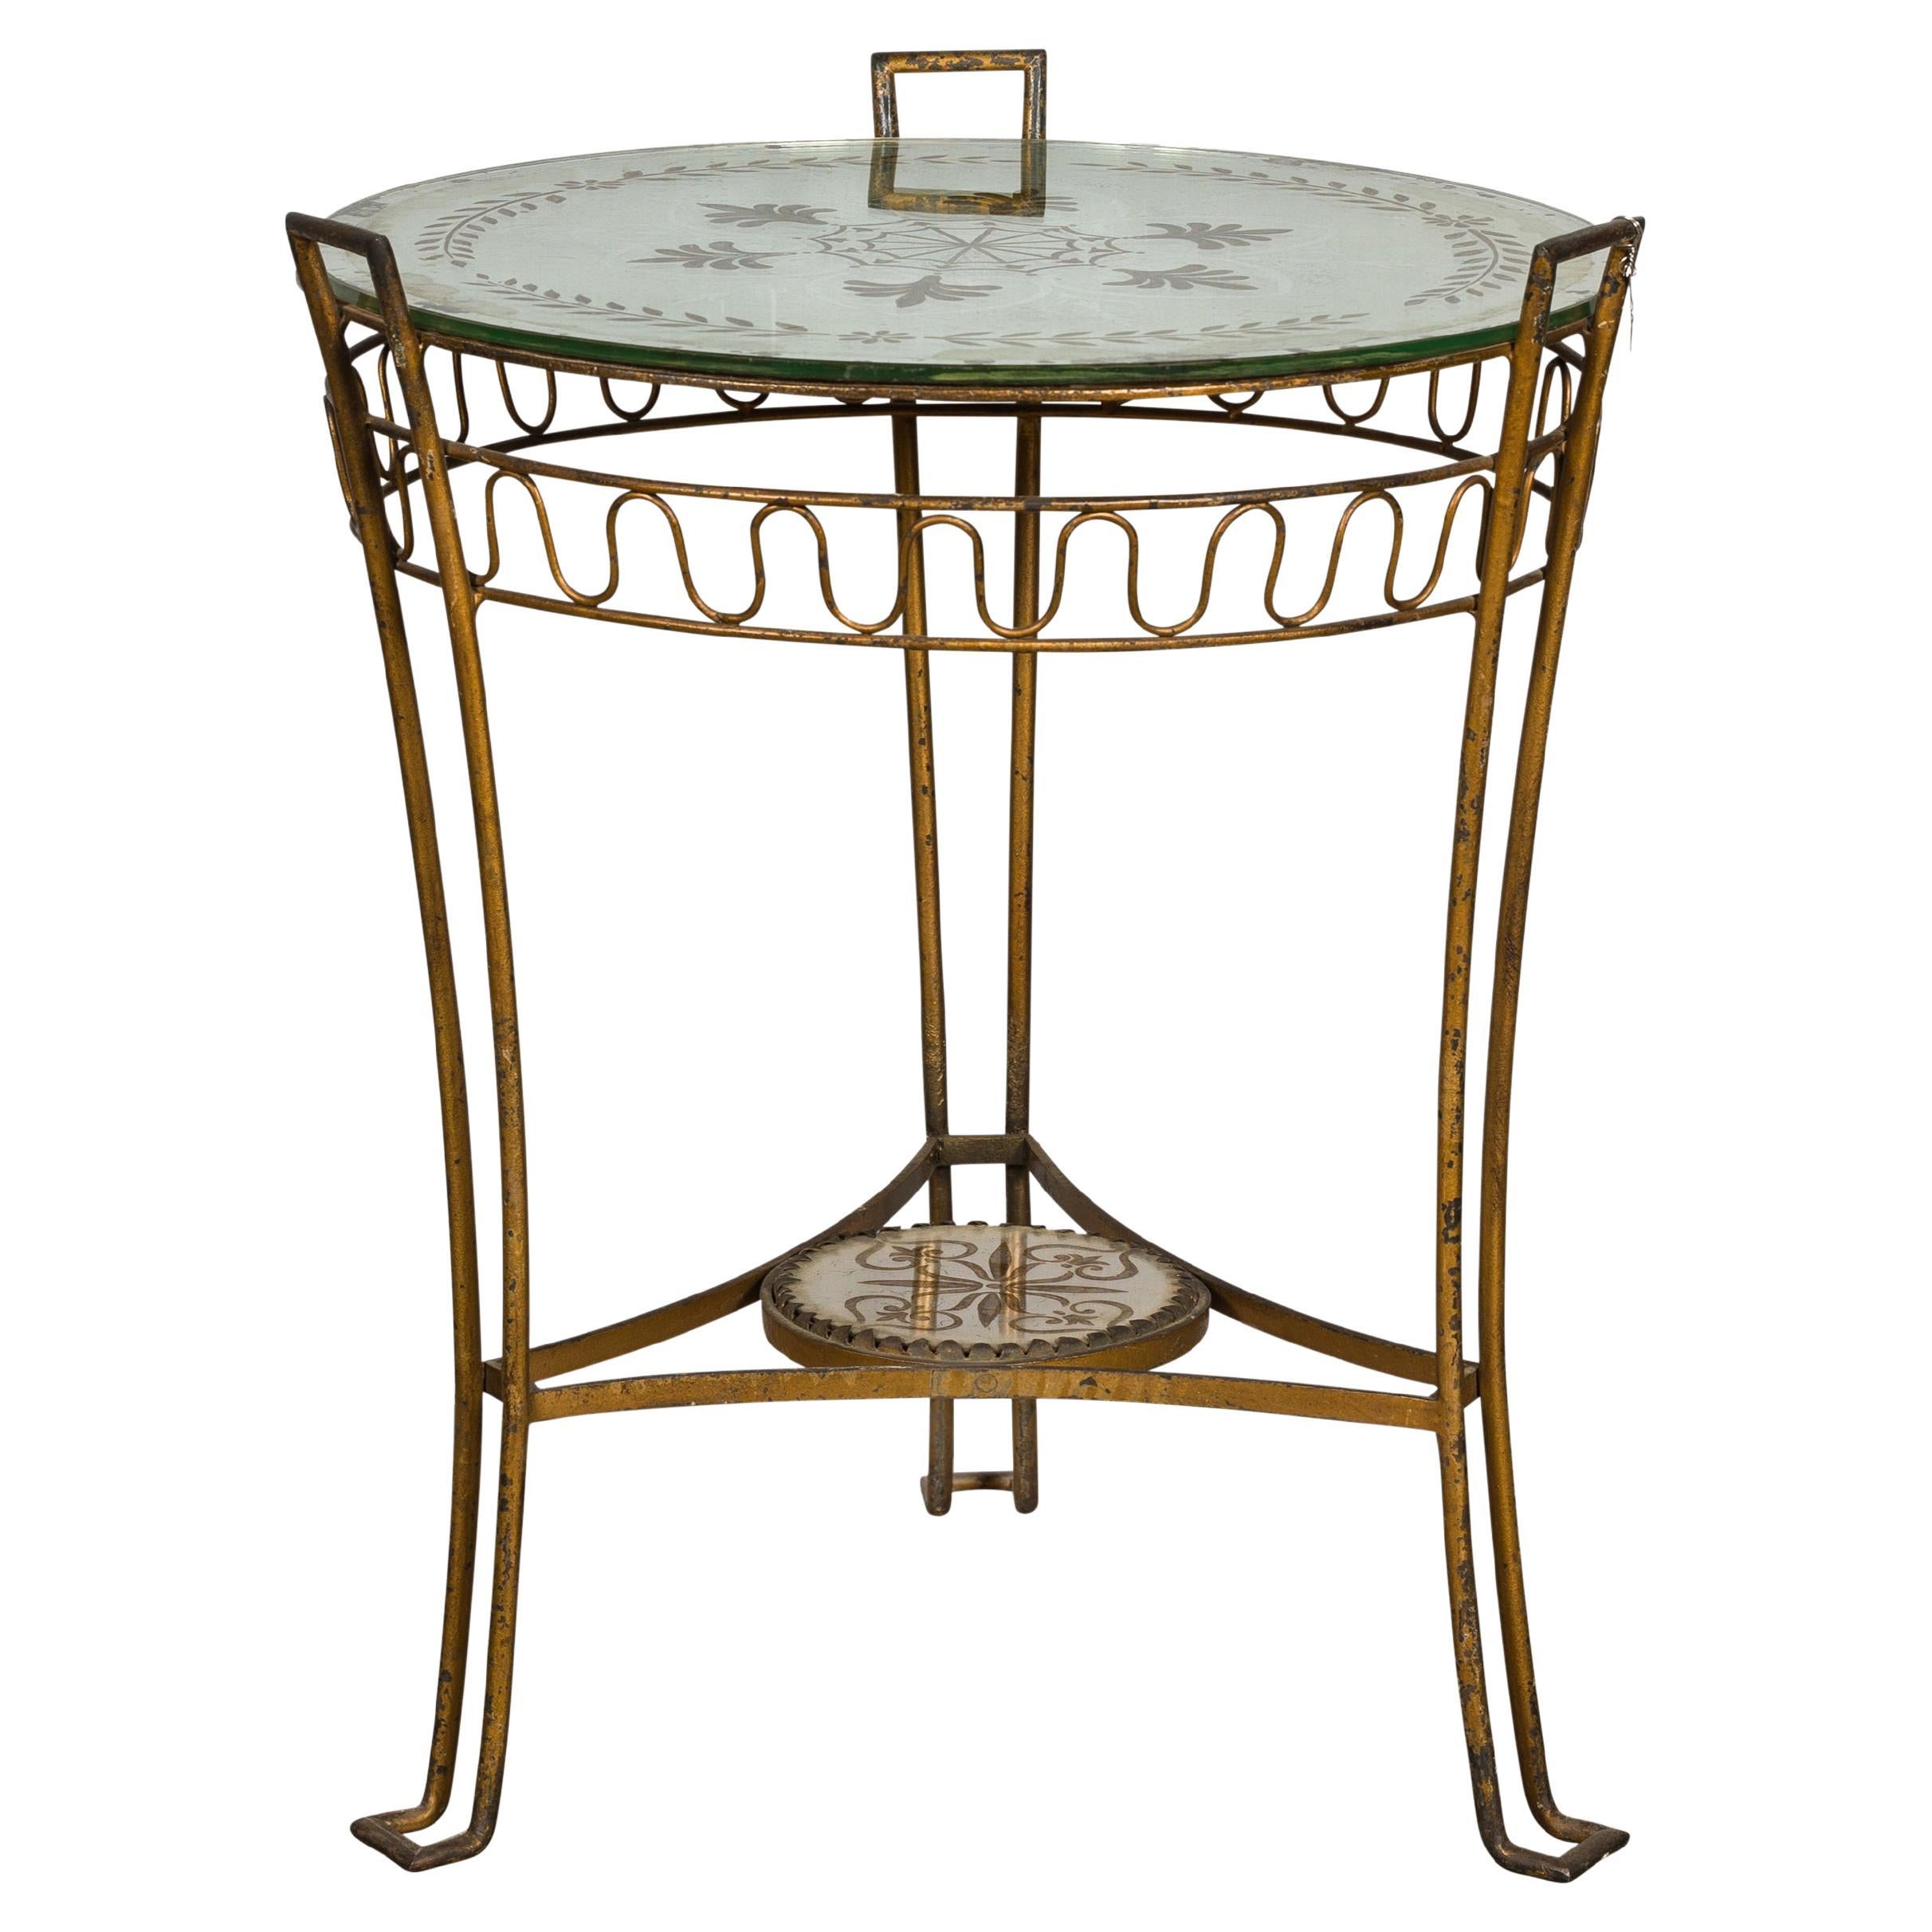 French 1920s Gilt Iron Side Table with Etched Foliage Mirrored Top and Low Shelf For Sale